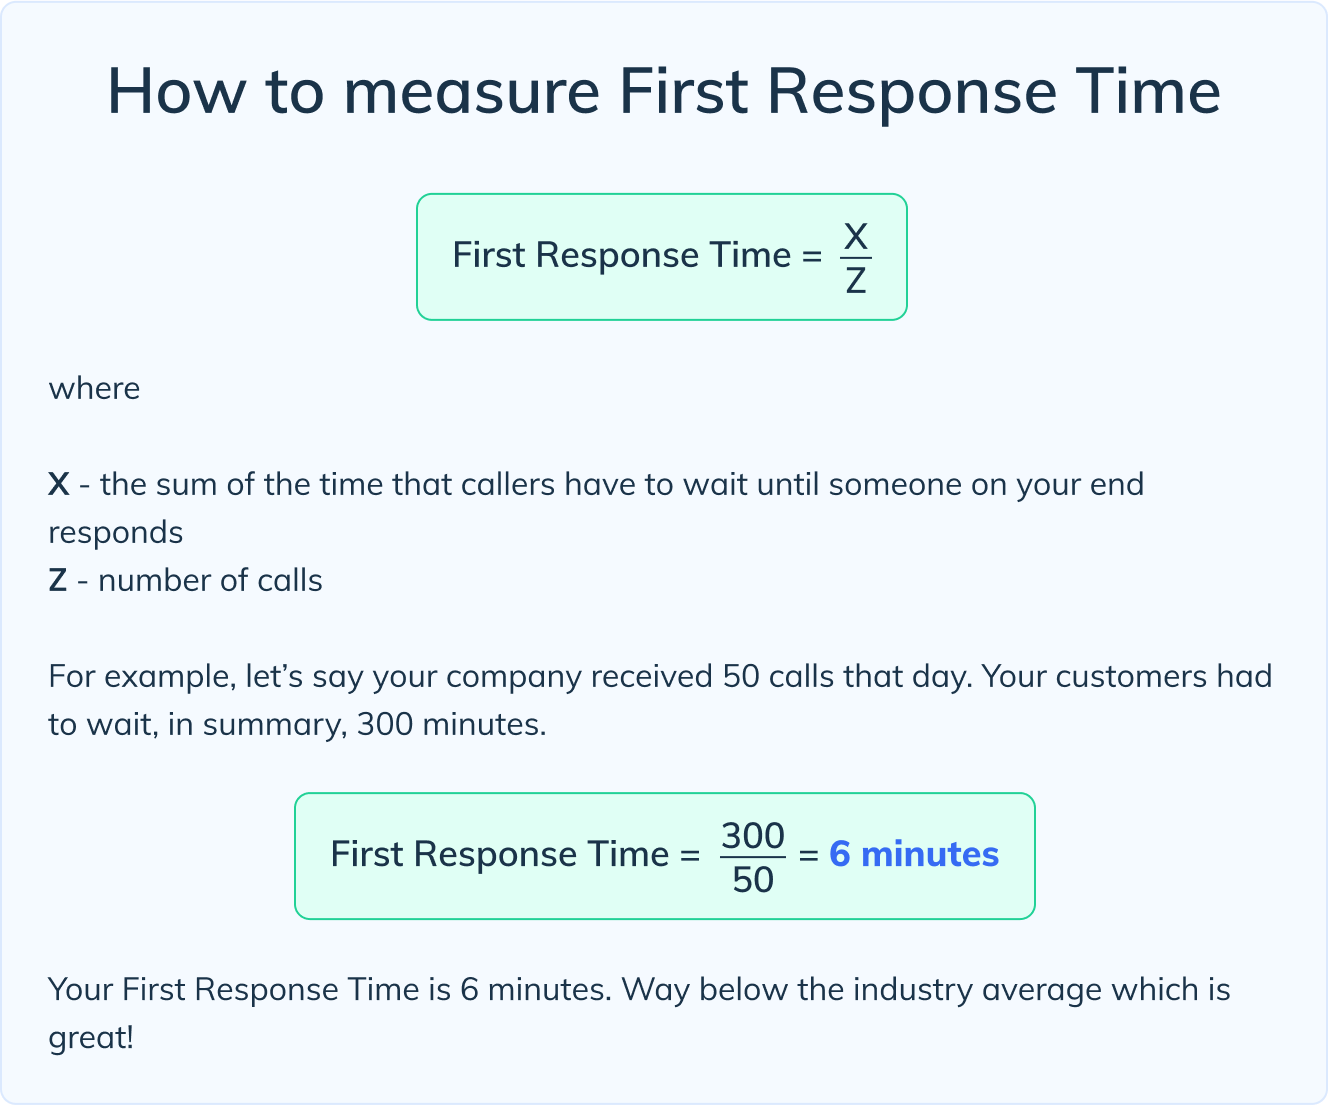 How to measure First Response Time